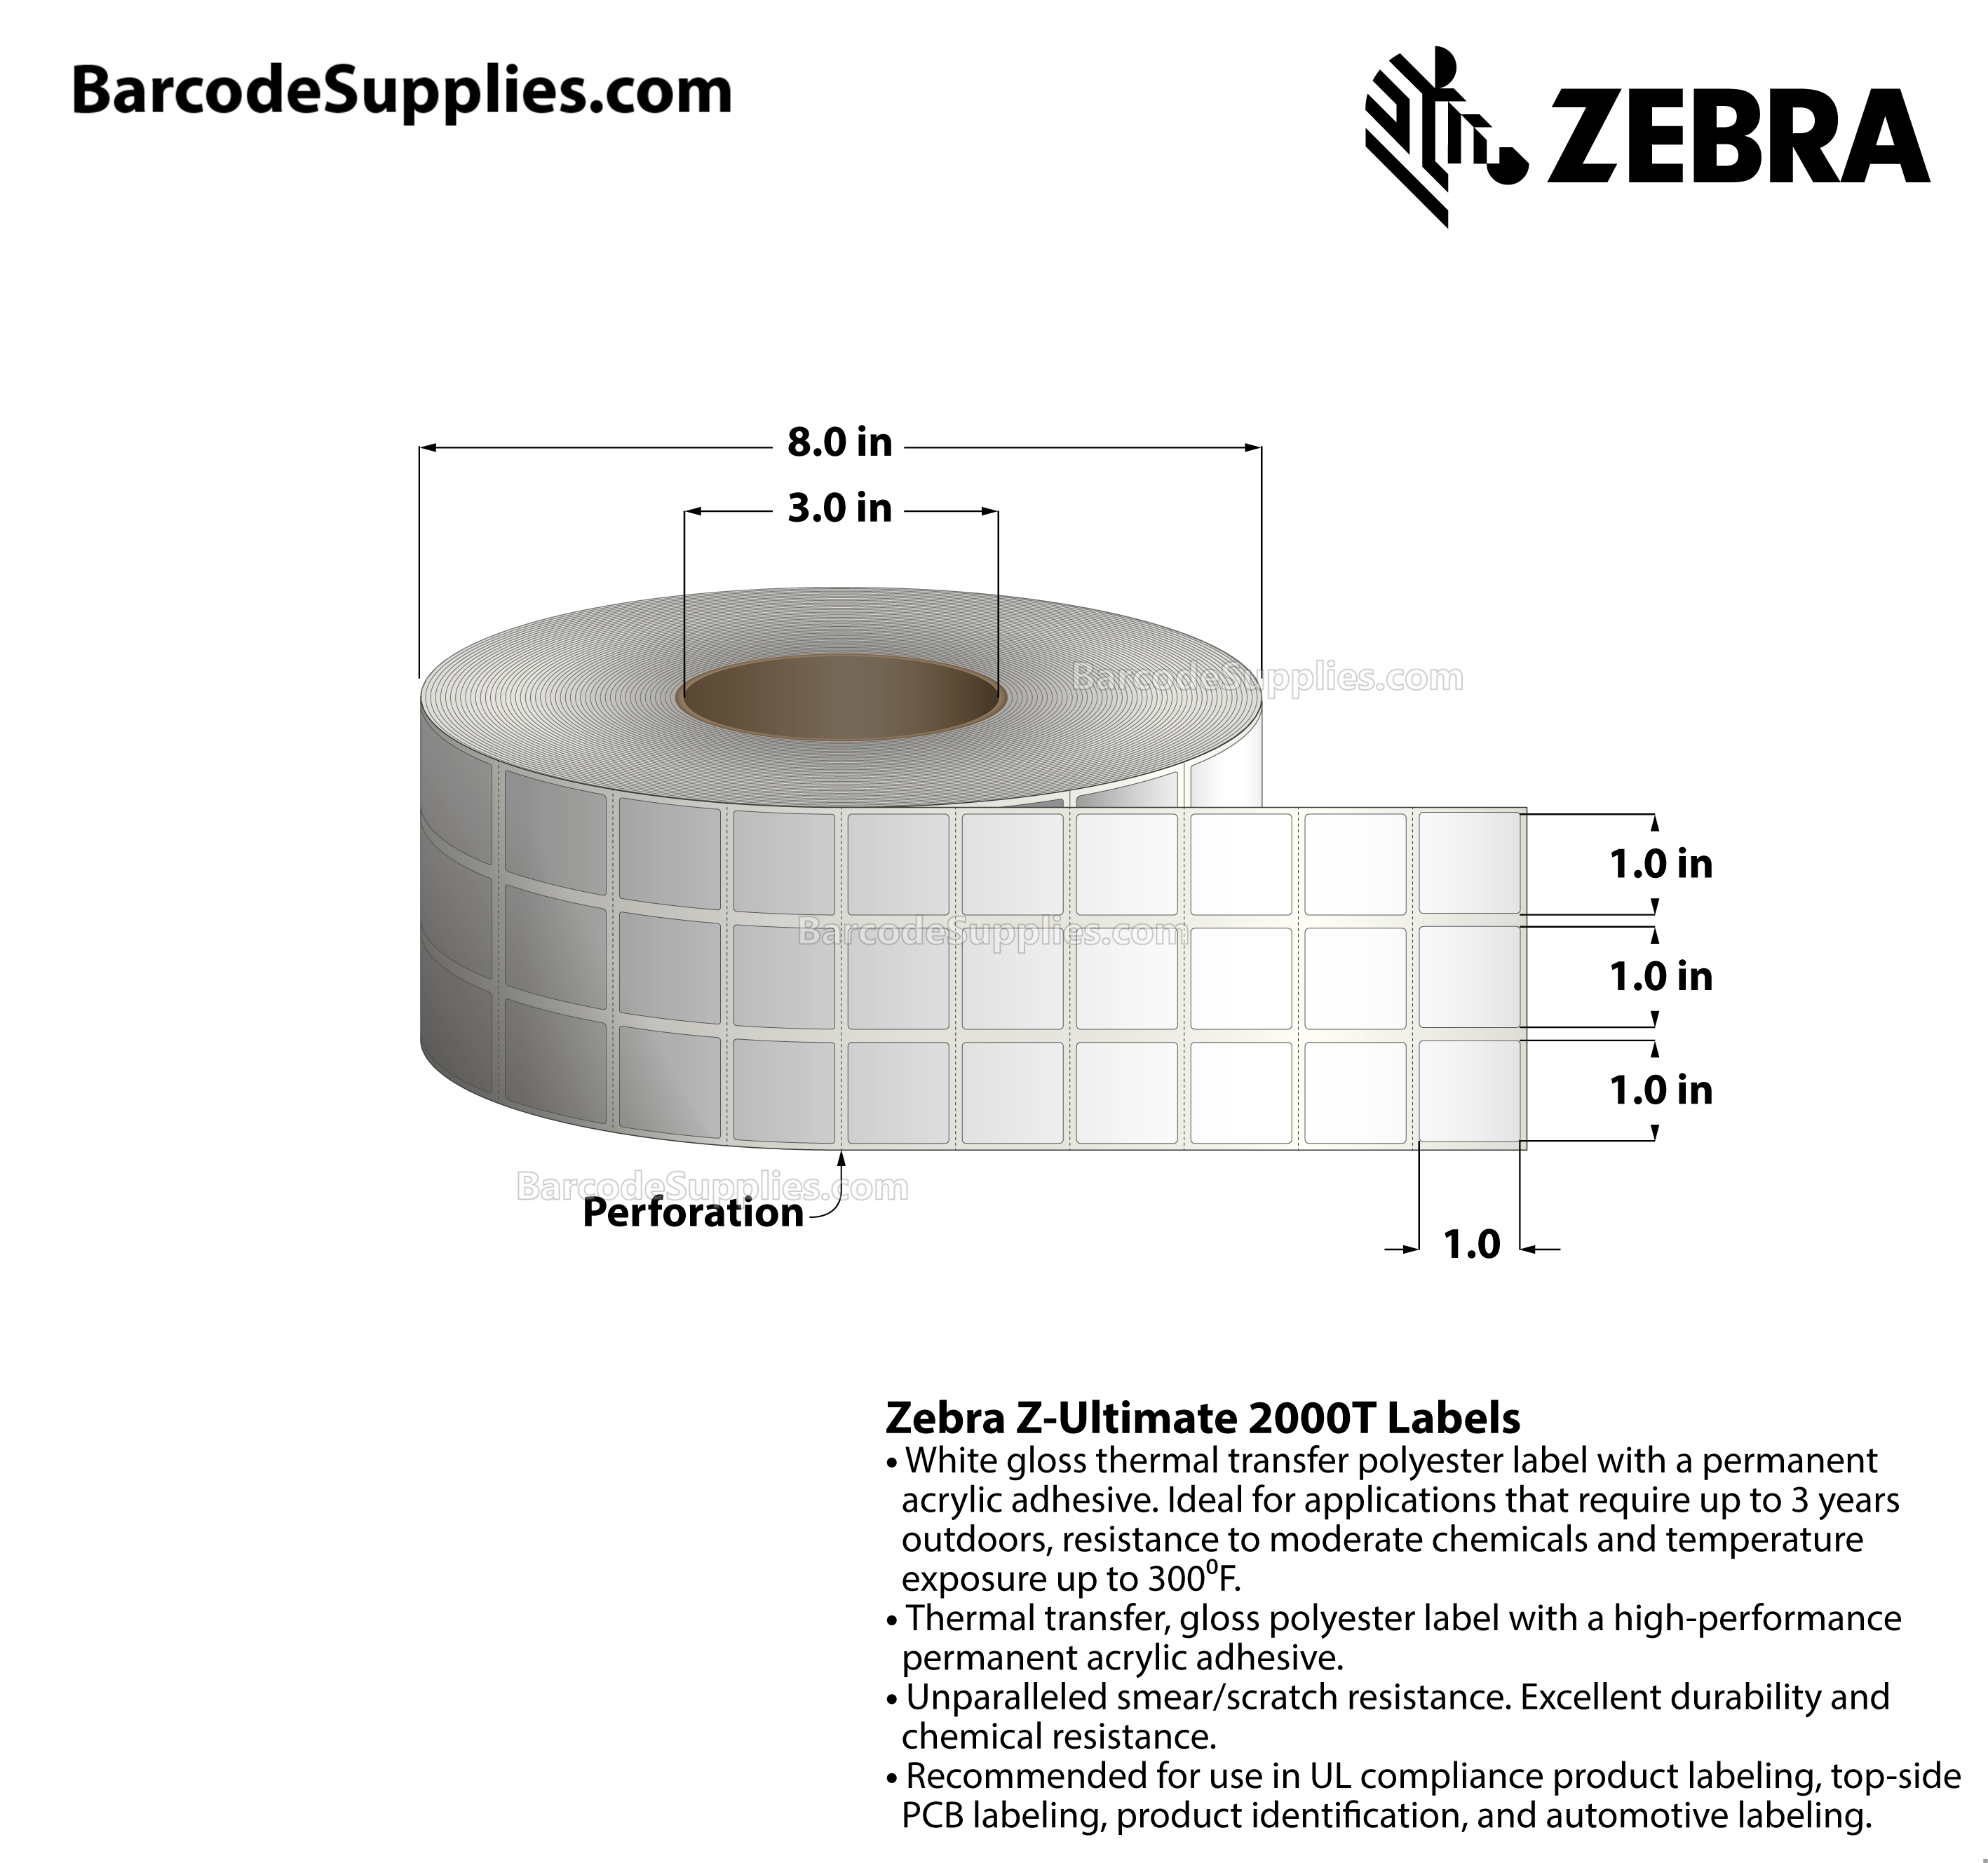 1 x 1 Thermal Transfer White Z-Ultimate 2000T (3-Across) Labels With Permanent Adhesive - Perforated - 16455 Labels Per Roll - Carton Of 4 Rolls - 65820 Labels Total - MPN: 10011977